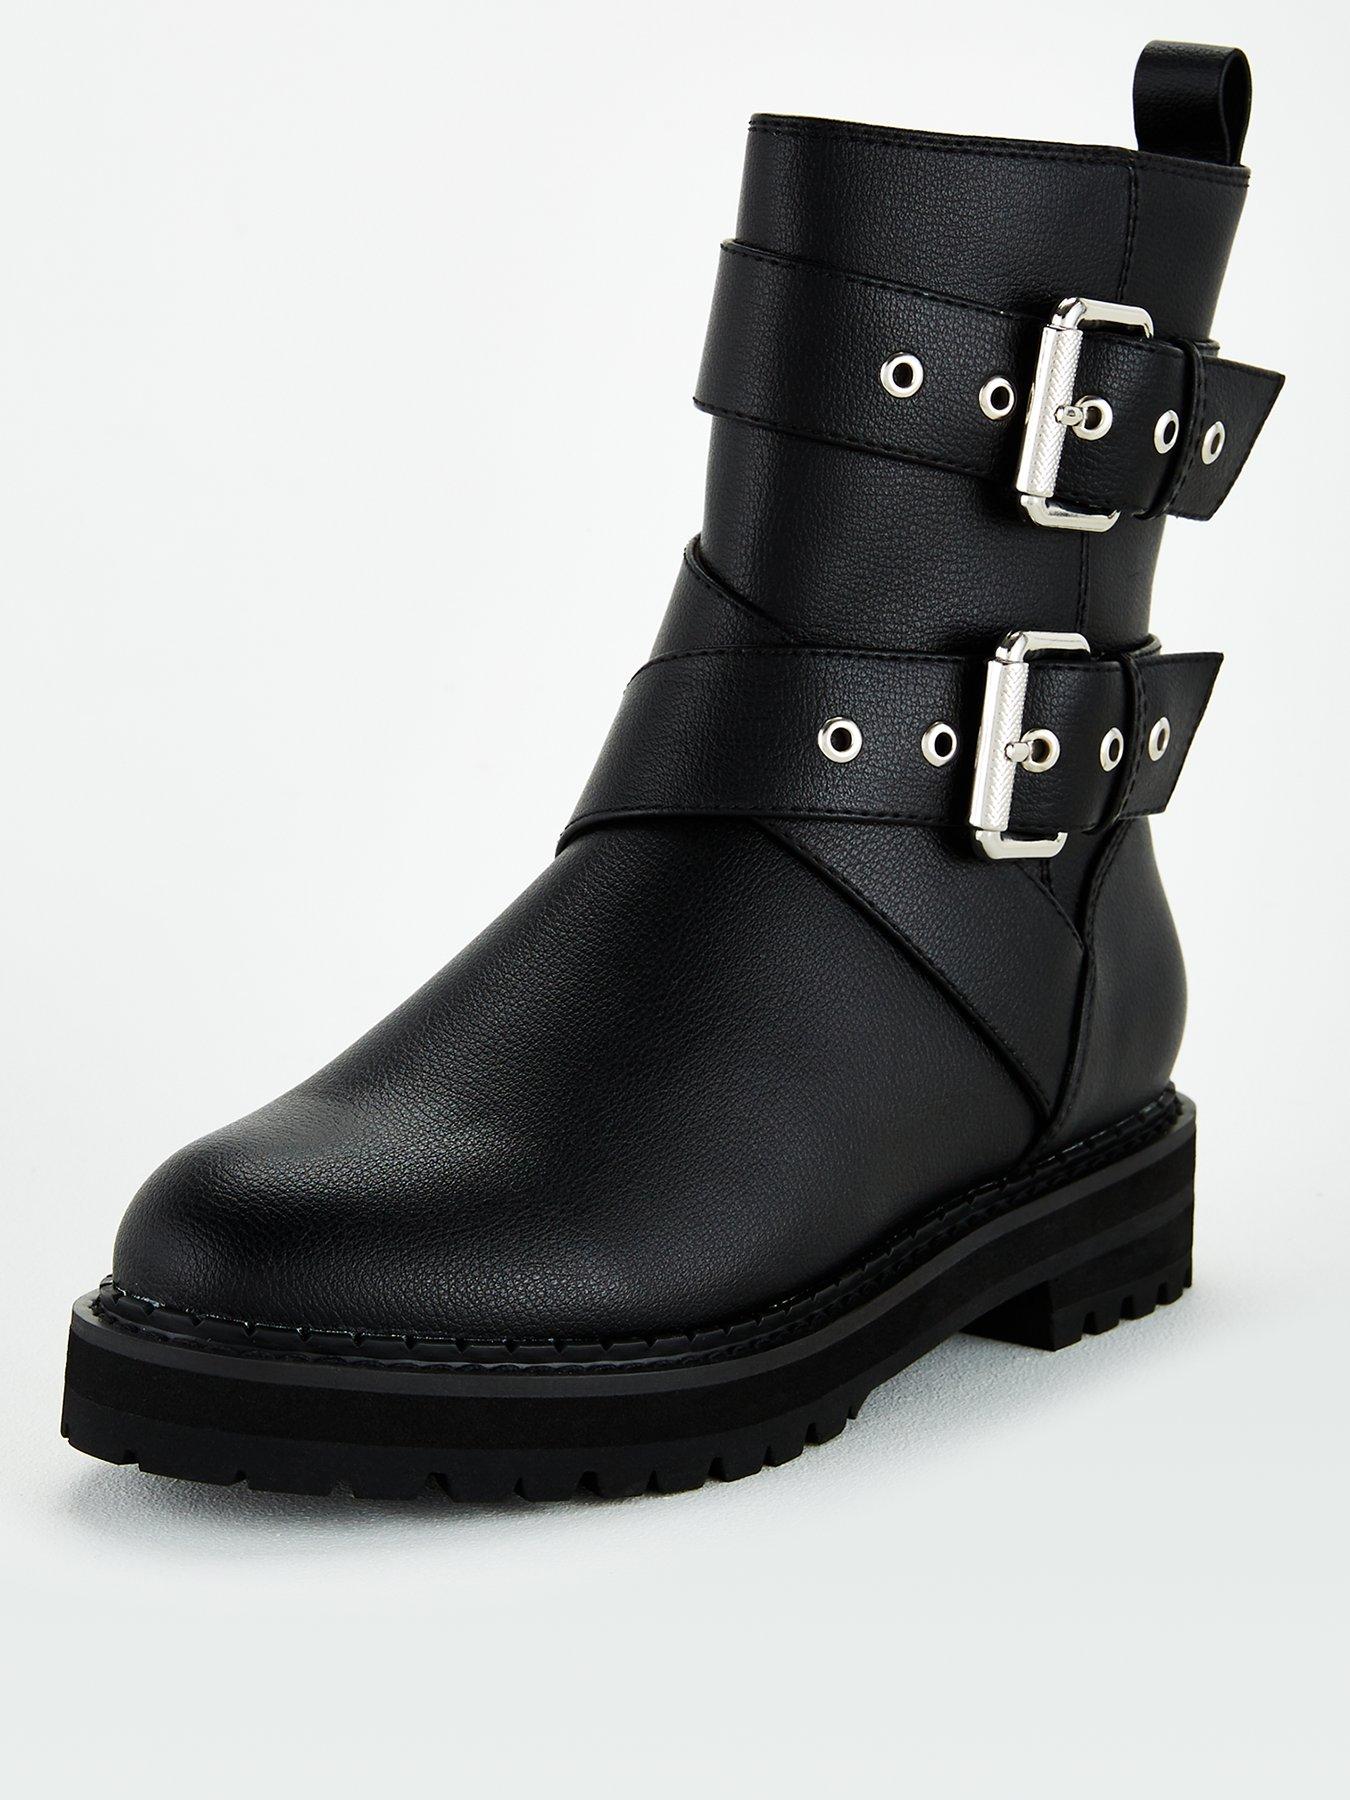 Womens Boots | Winter Boots | Very.co.uk